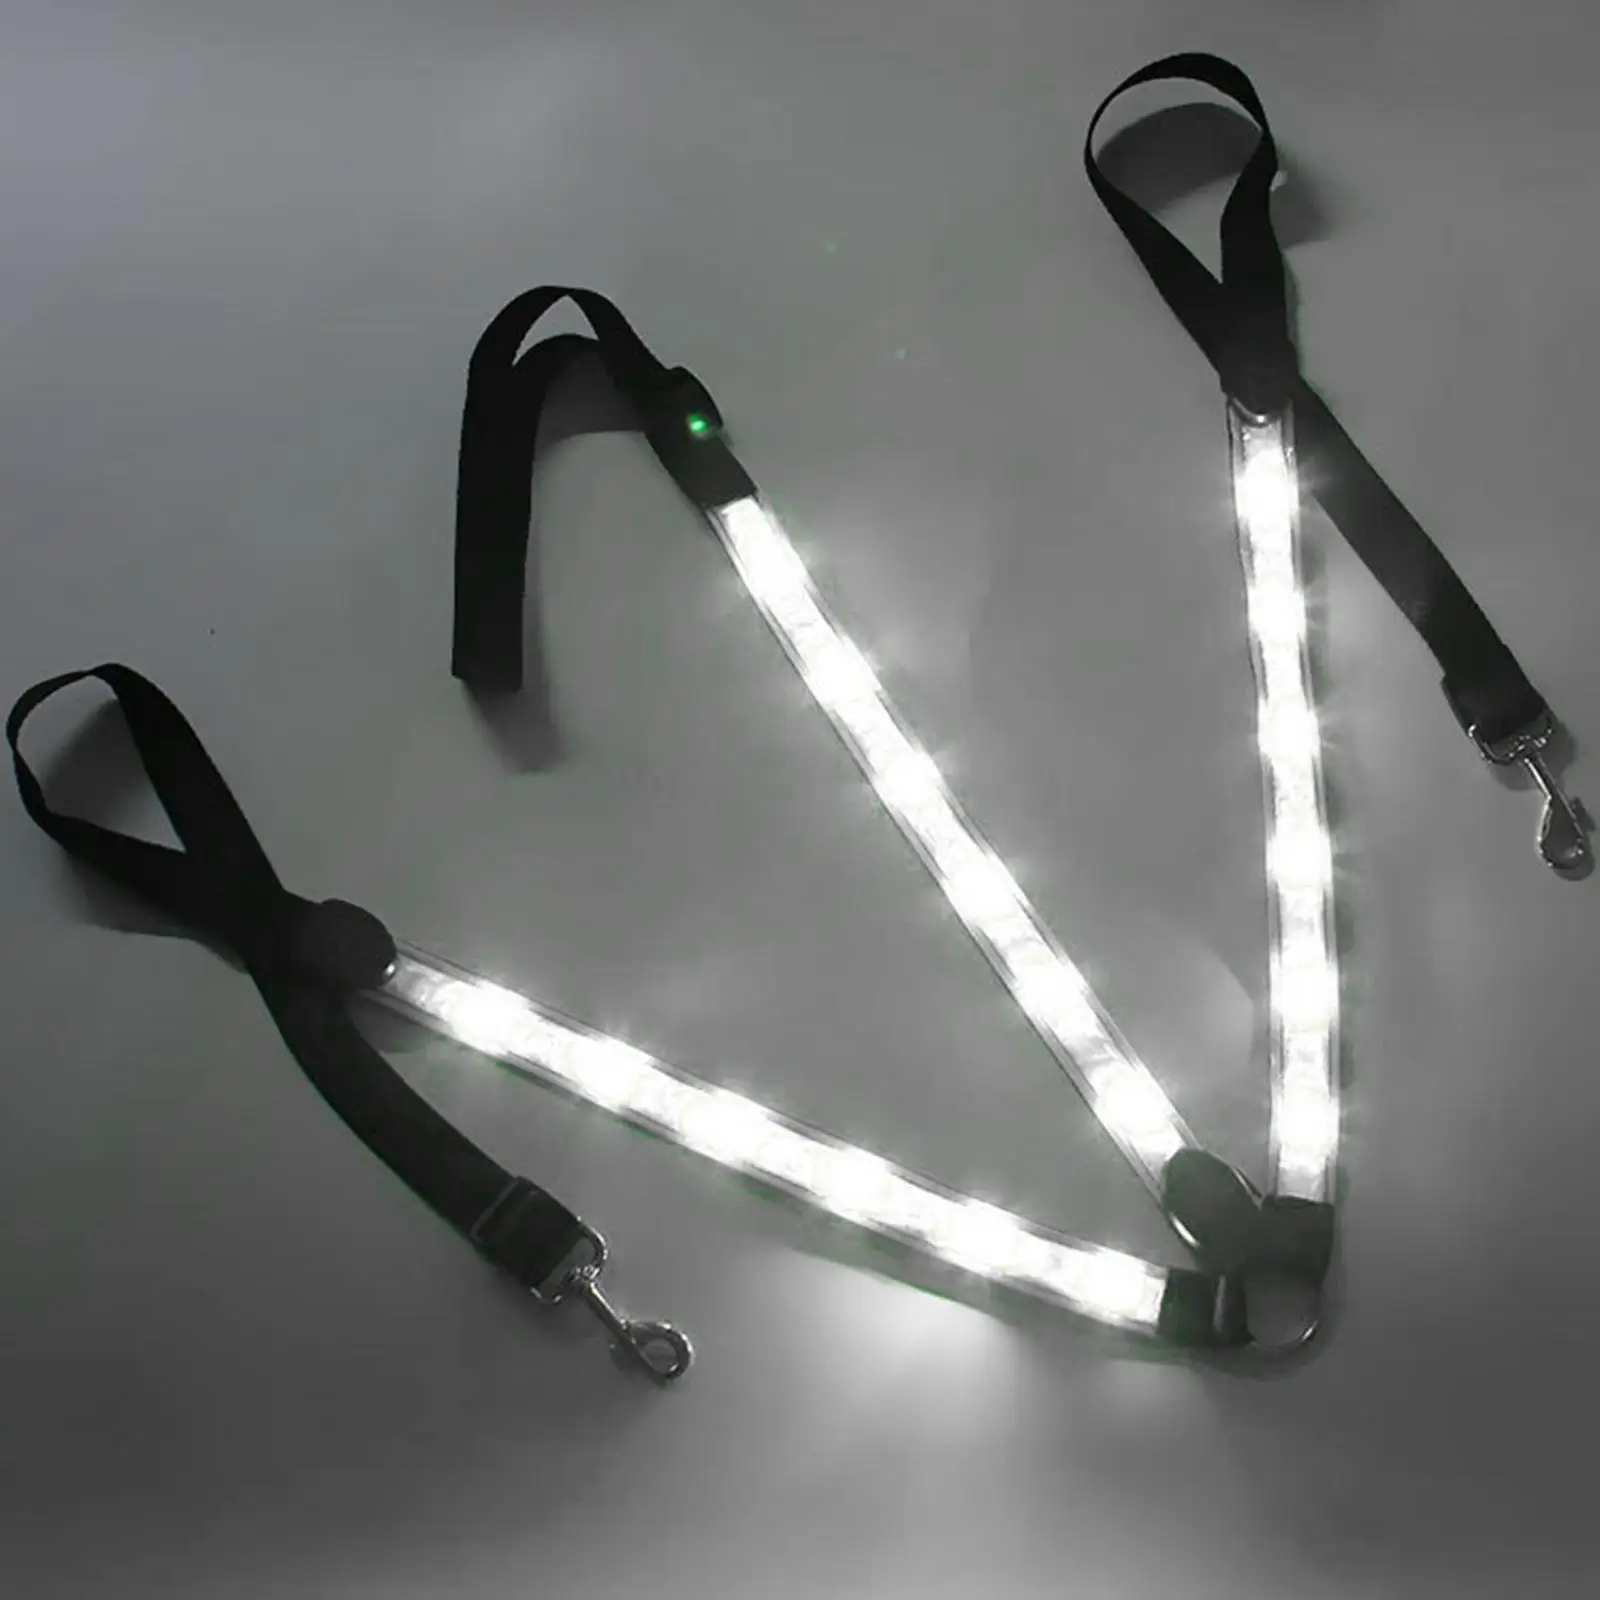 LED Horse Breastplate Collar Battery Operated Equestrian Safety Equipment High Visibility Tack 3 Lighting Modes  for Horse Show